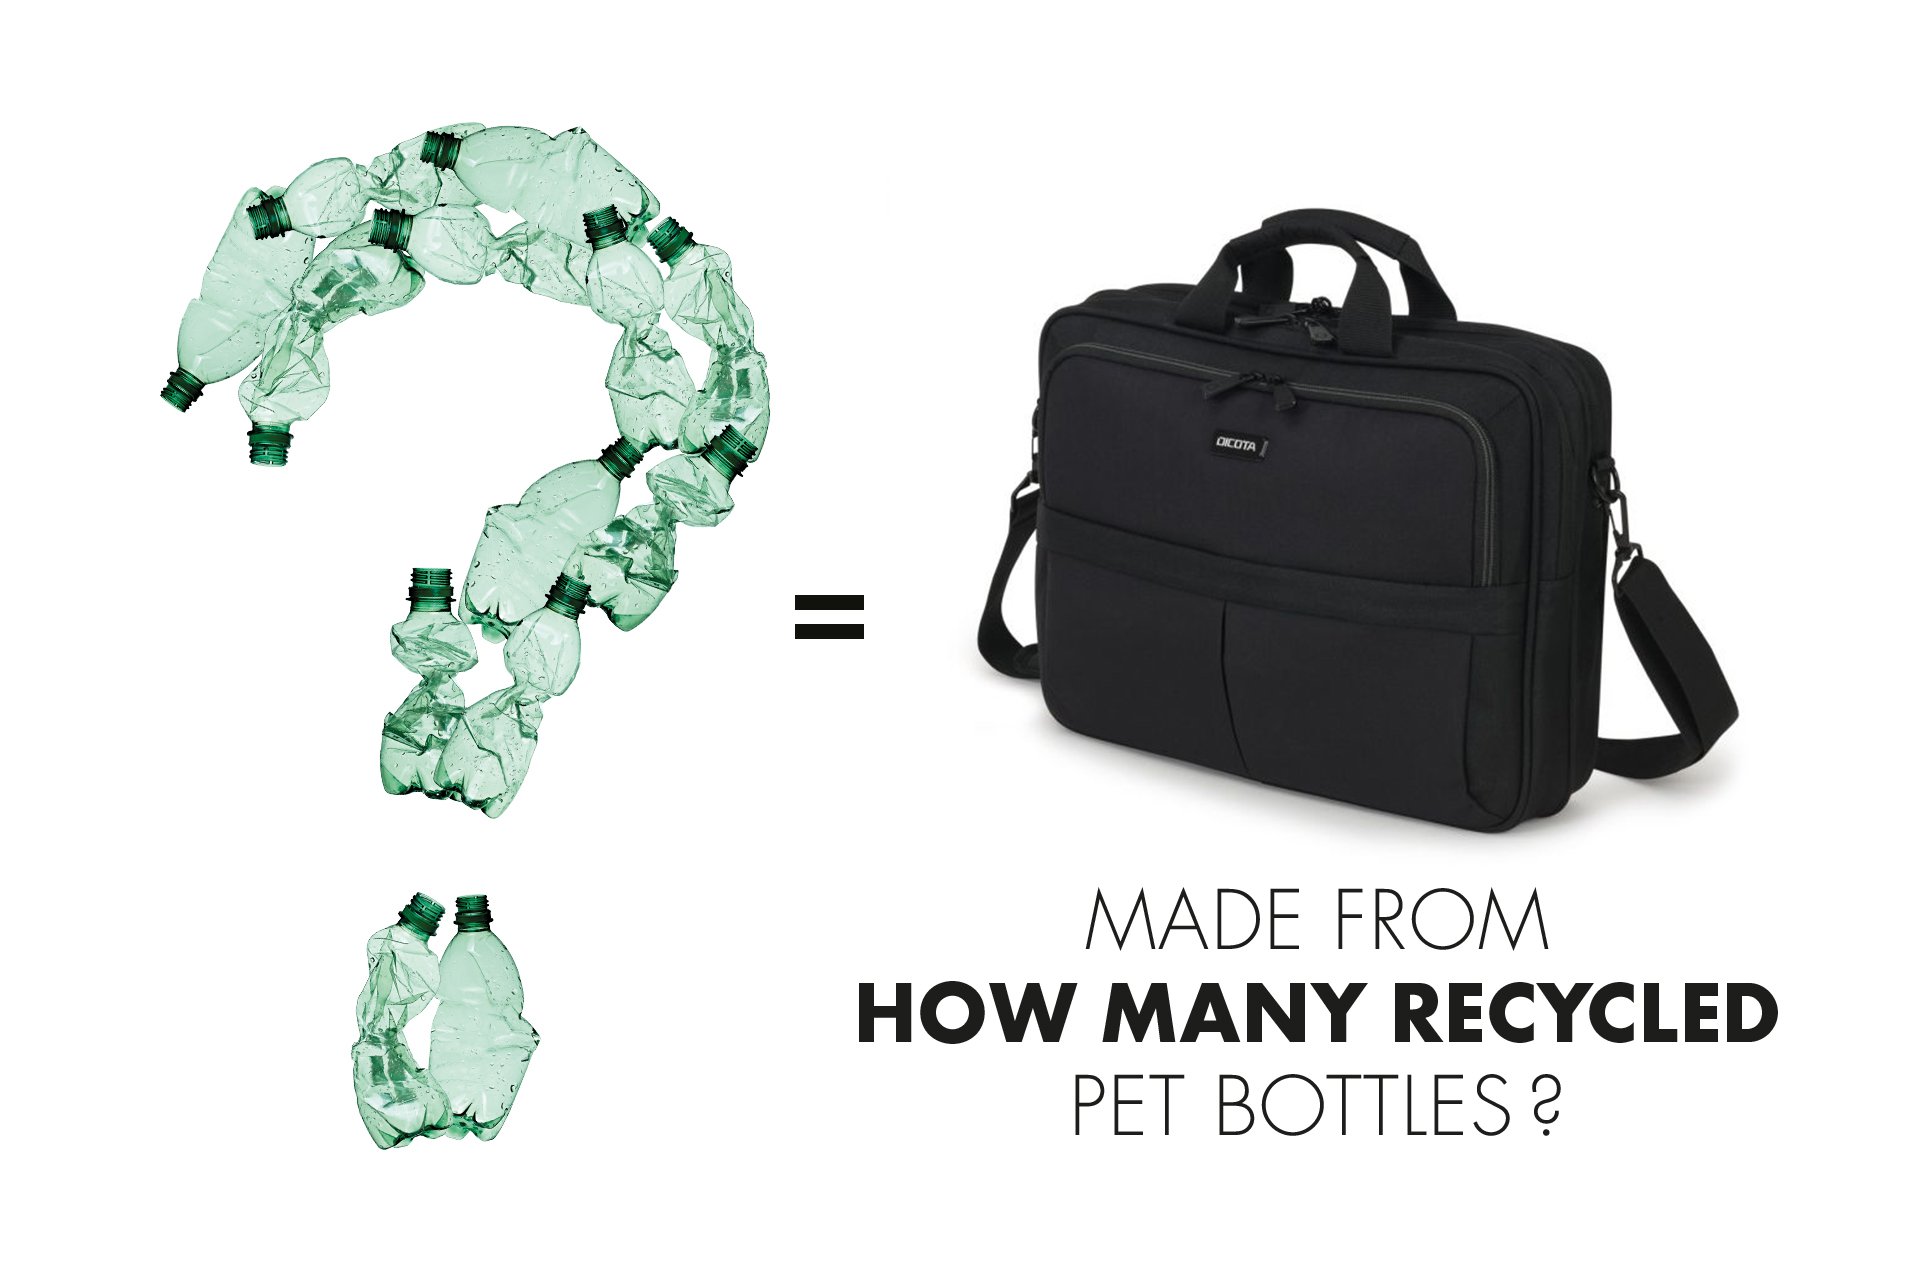 How many PET Bottles are recycled in one bag?